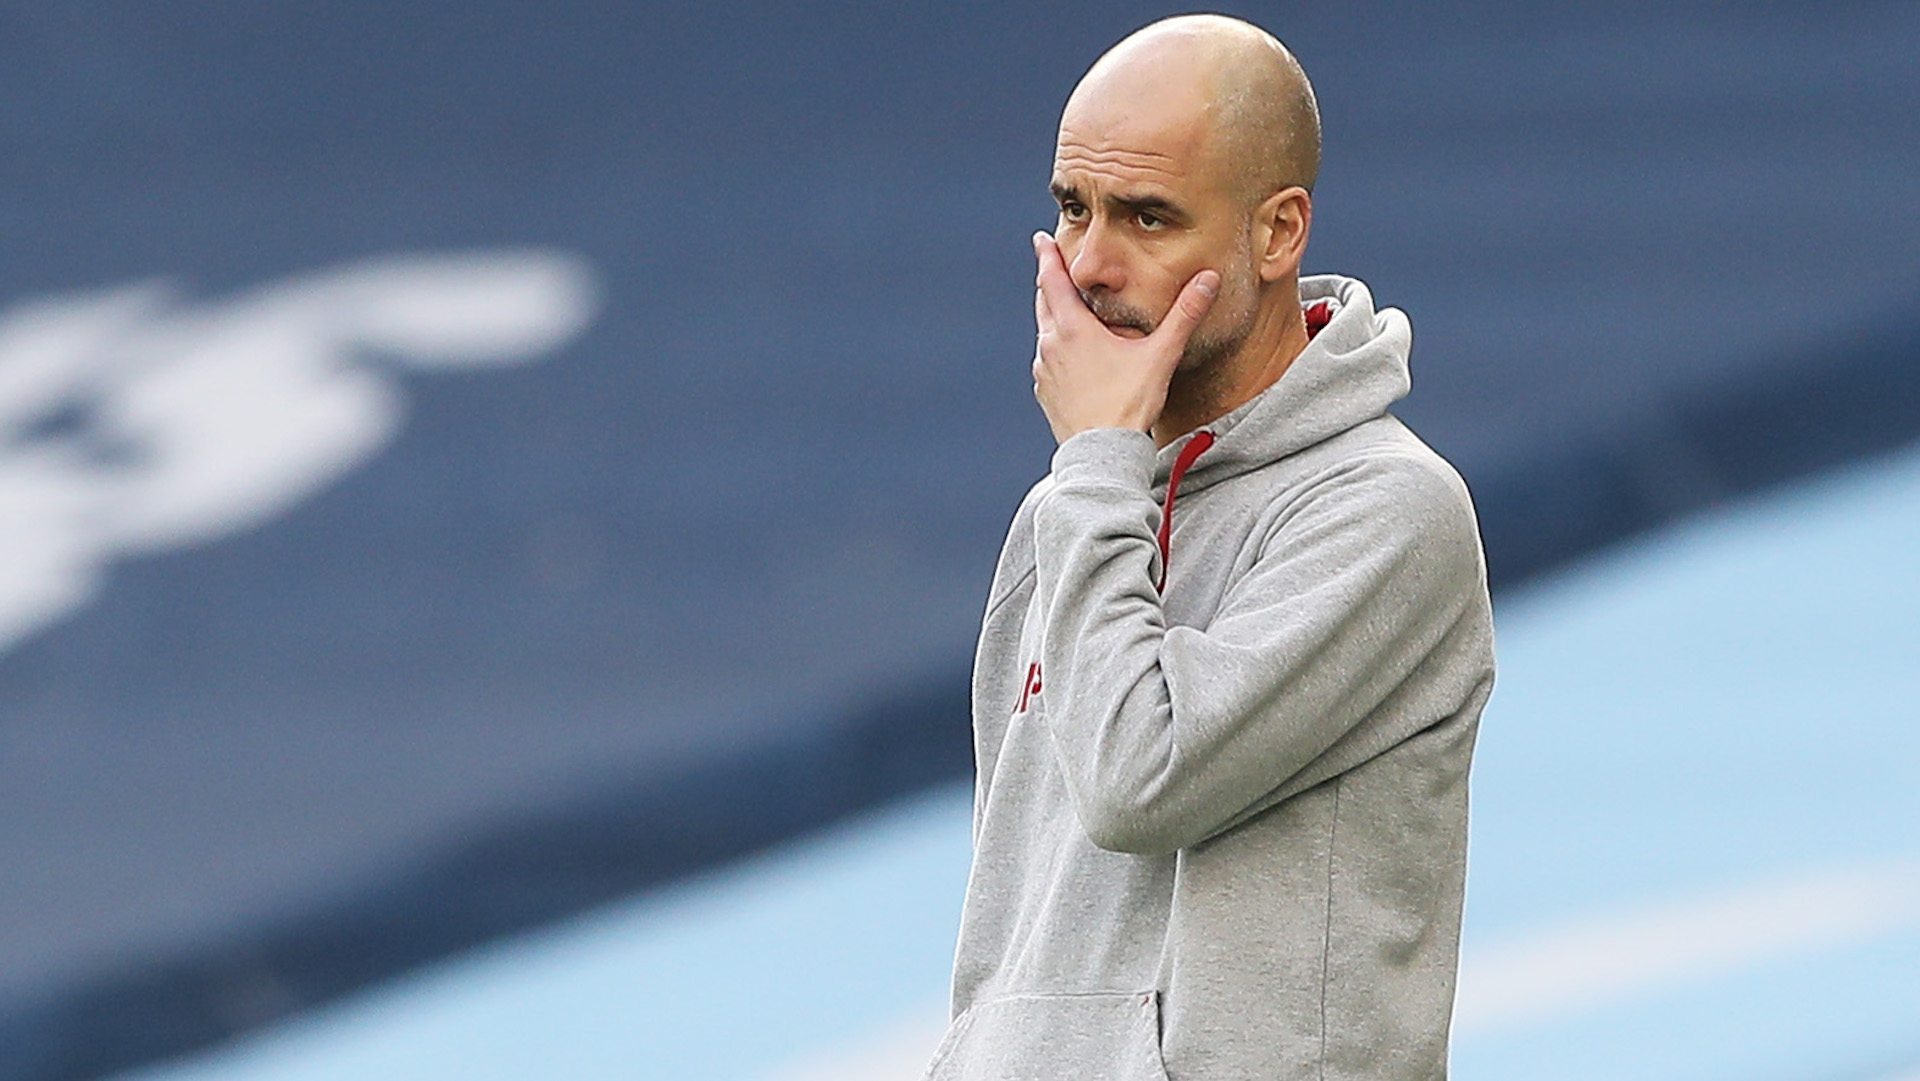 'The news is 21 victories in a row' - Guardiola determined to push on from derby defeat